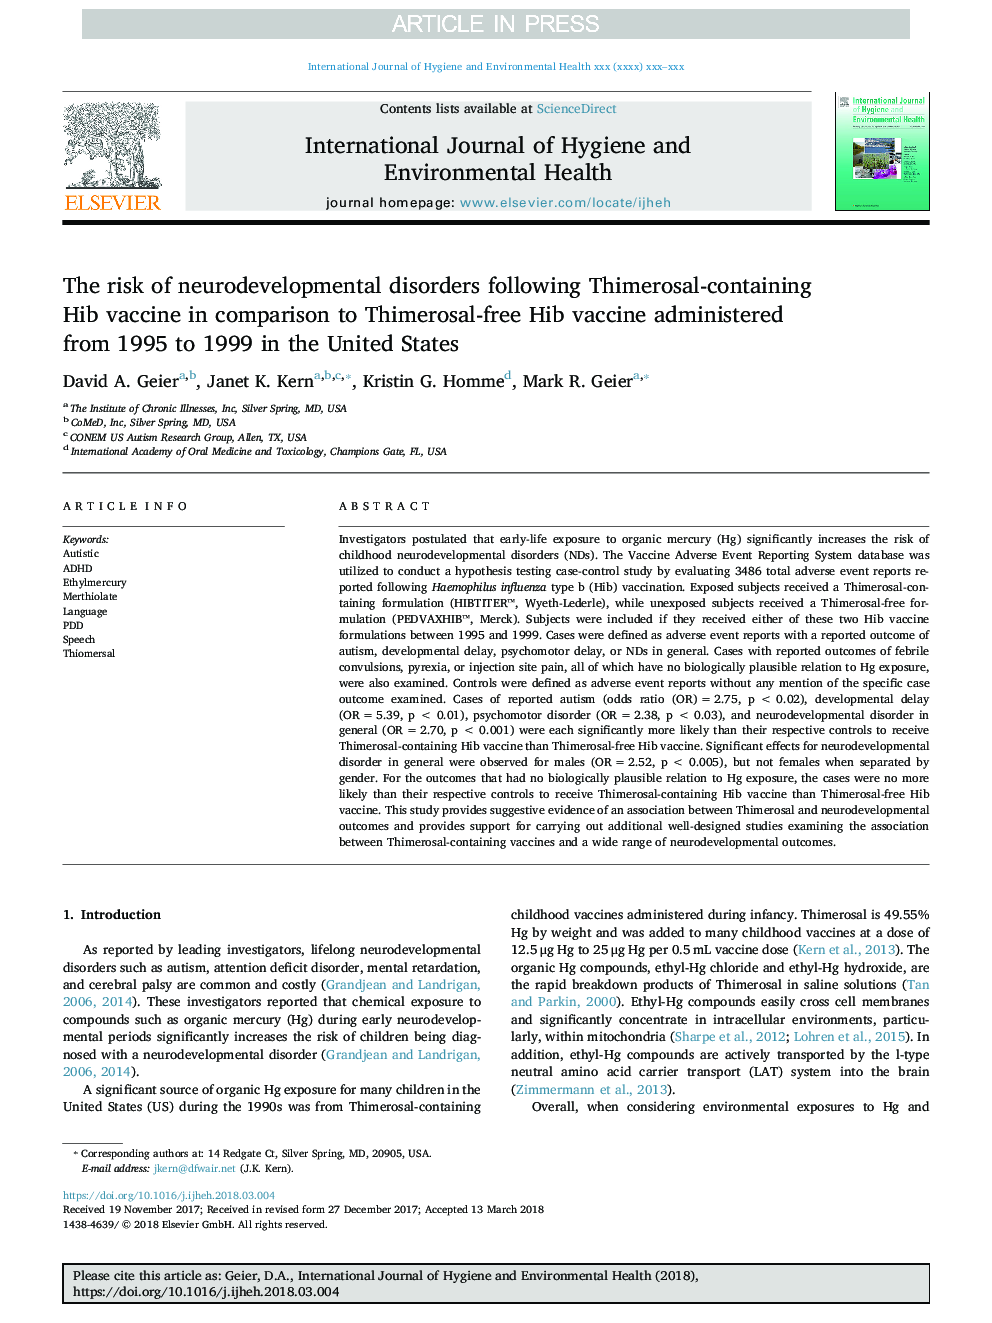 The risk of neurodevelopmental disorders following Thimerosal-containing Hib vaccine in comparison to Thimerosal-free Hib vaccine administered from 1995 to 1999 in the United States